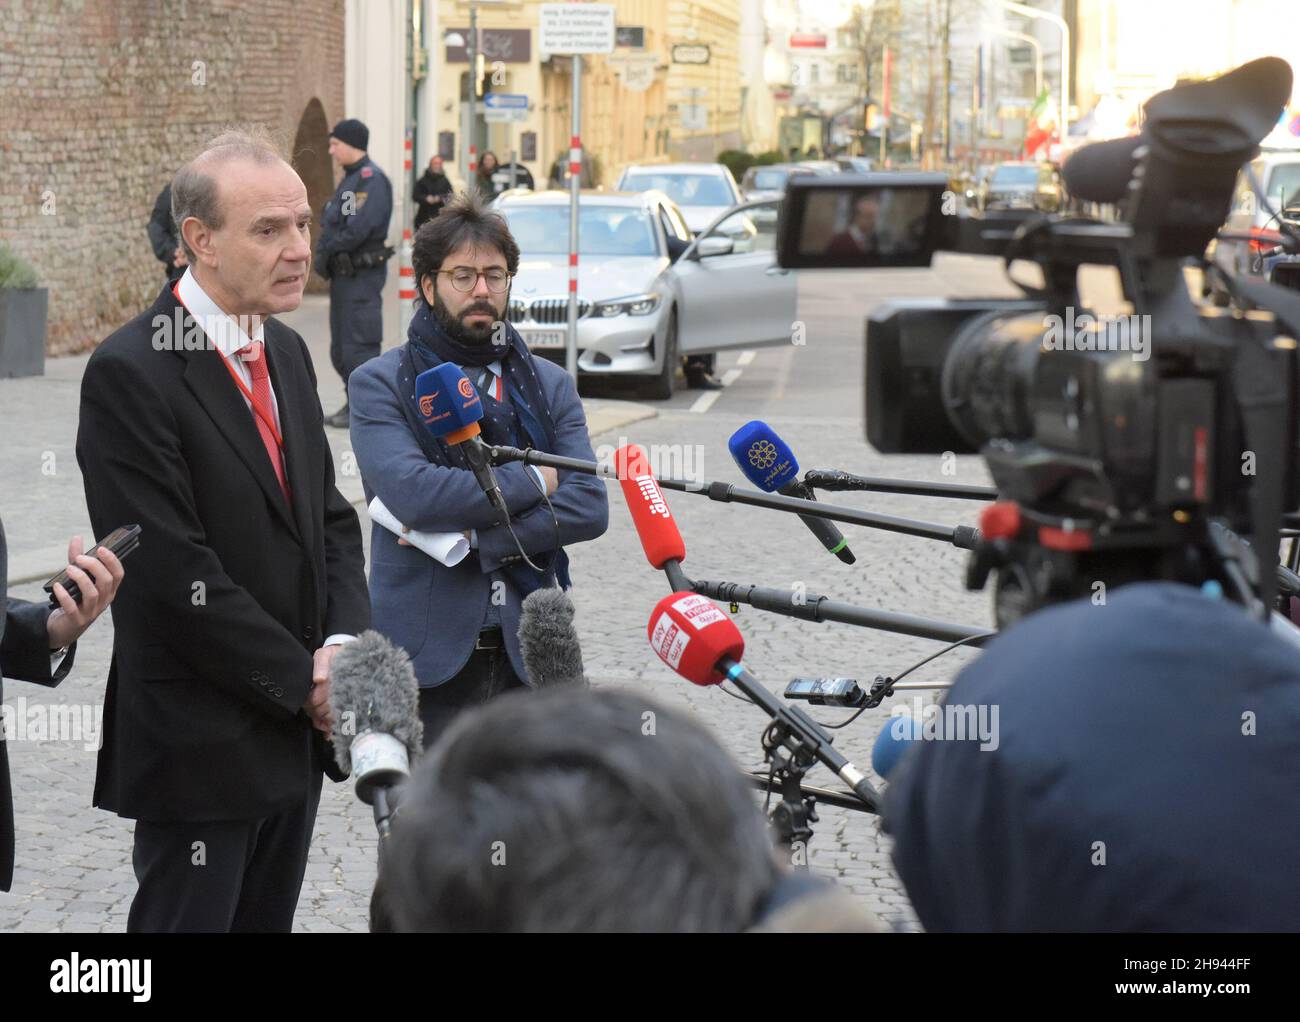 Vienna, Austria. 3rd Dec, 2021. Enrique Mora, deputy secretary-general of the European External Action Service, speaks to reporters after a meeting of the Joint Comprehensive Plan of Action (JCPOA) Joint Commission in Vienna, Austria, on Dec. 3, 2021. Credit: Guo Chen/Xinhua/Alamy Live News Stock Photo